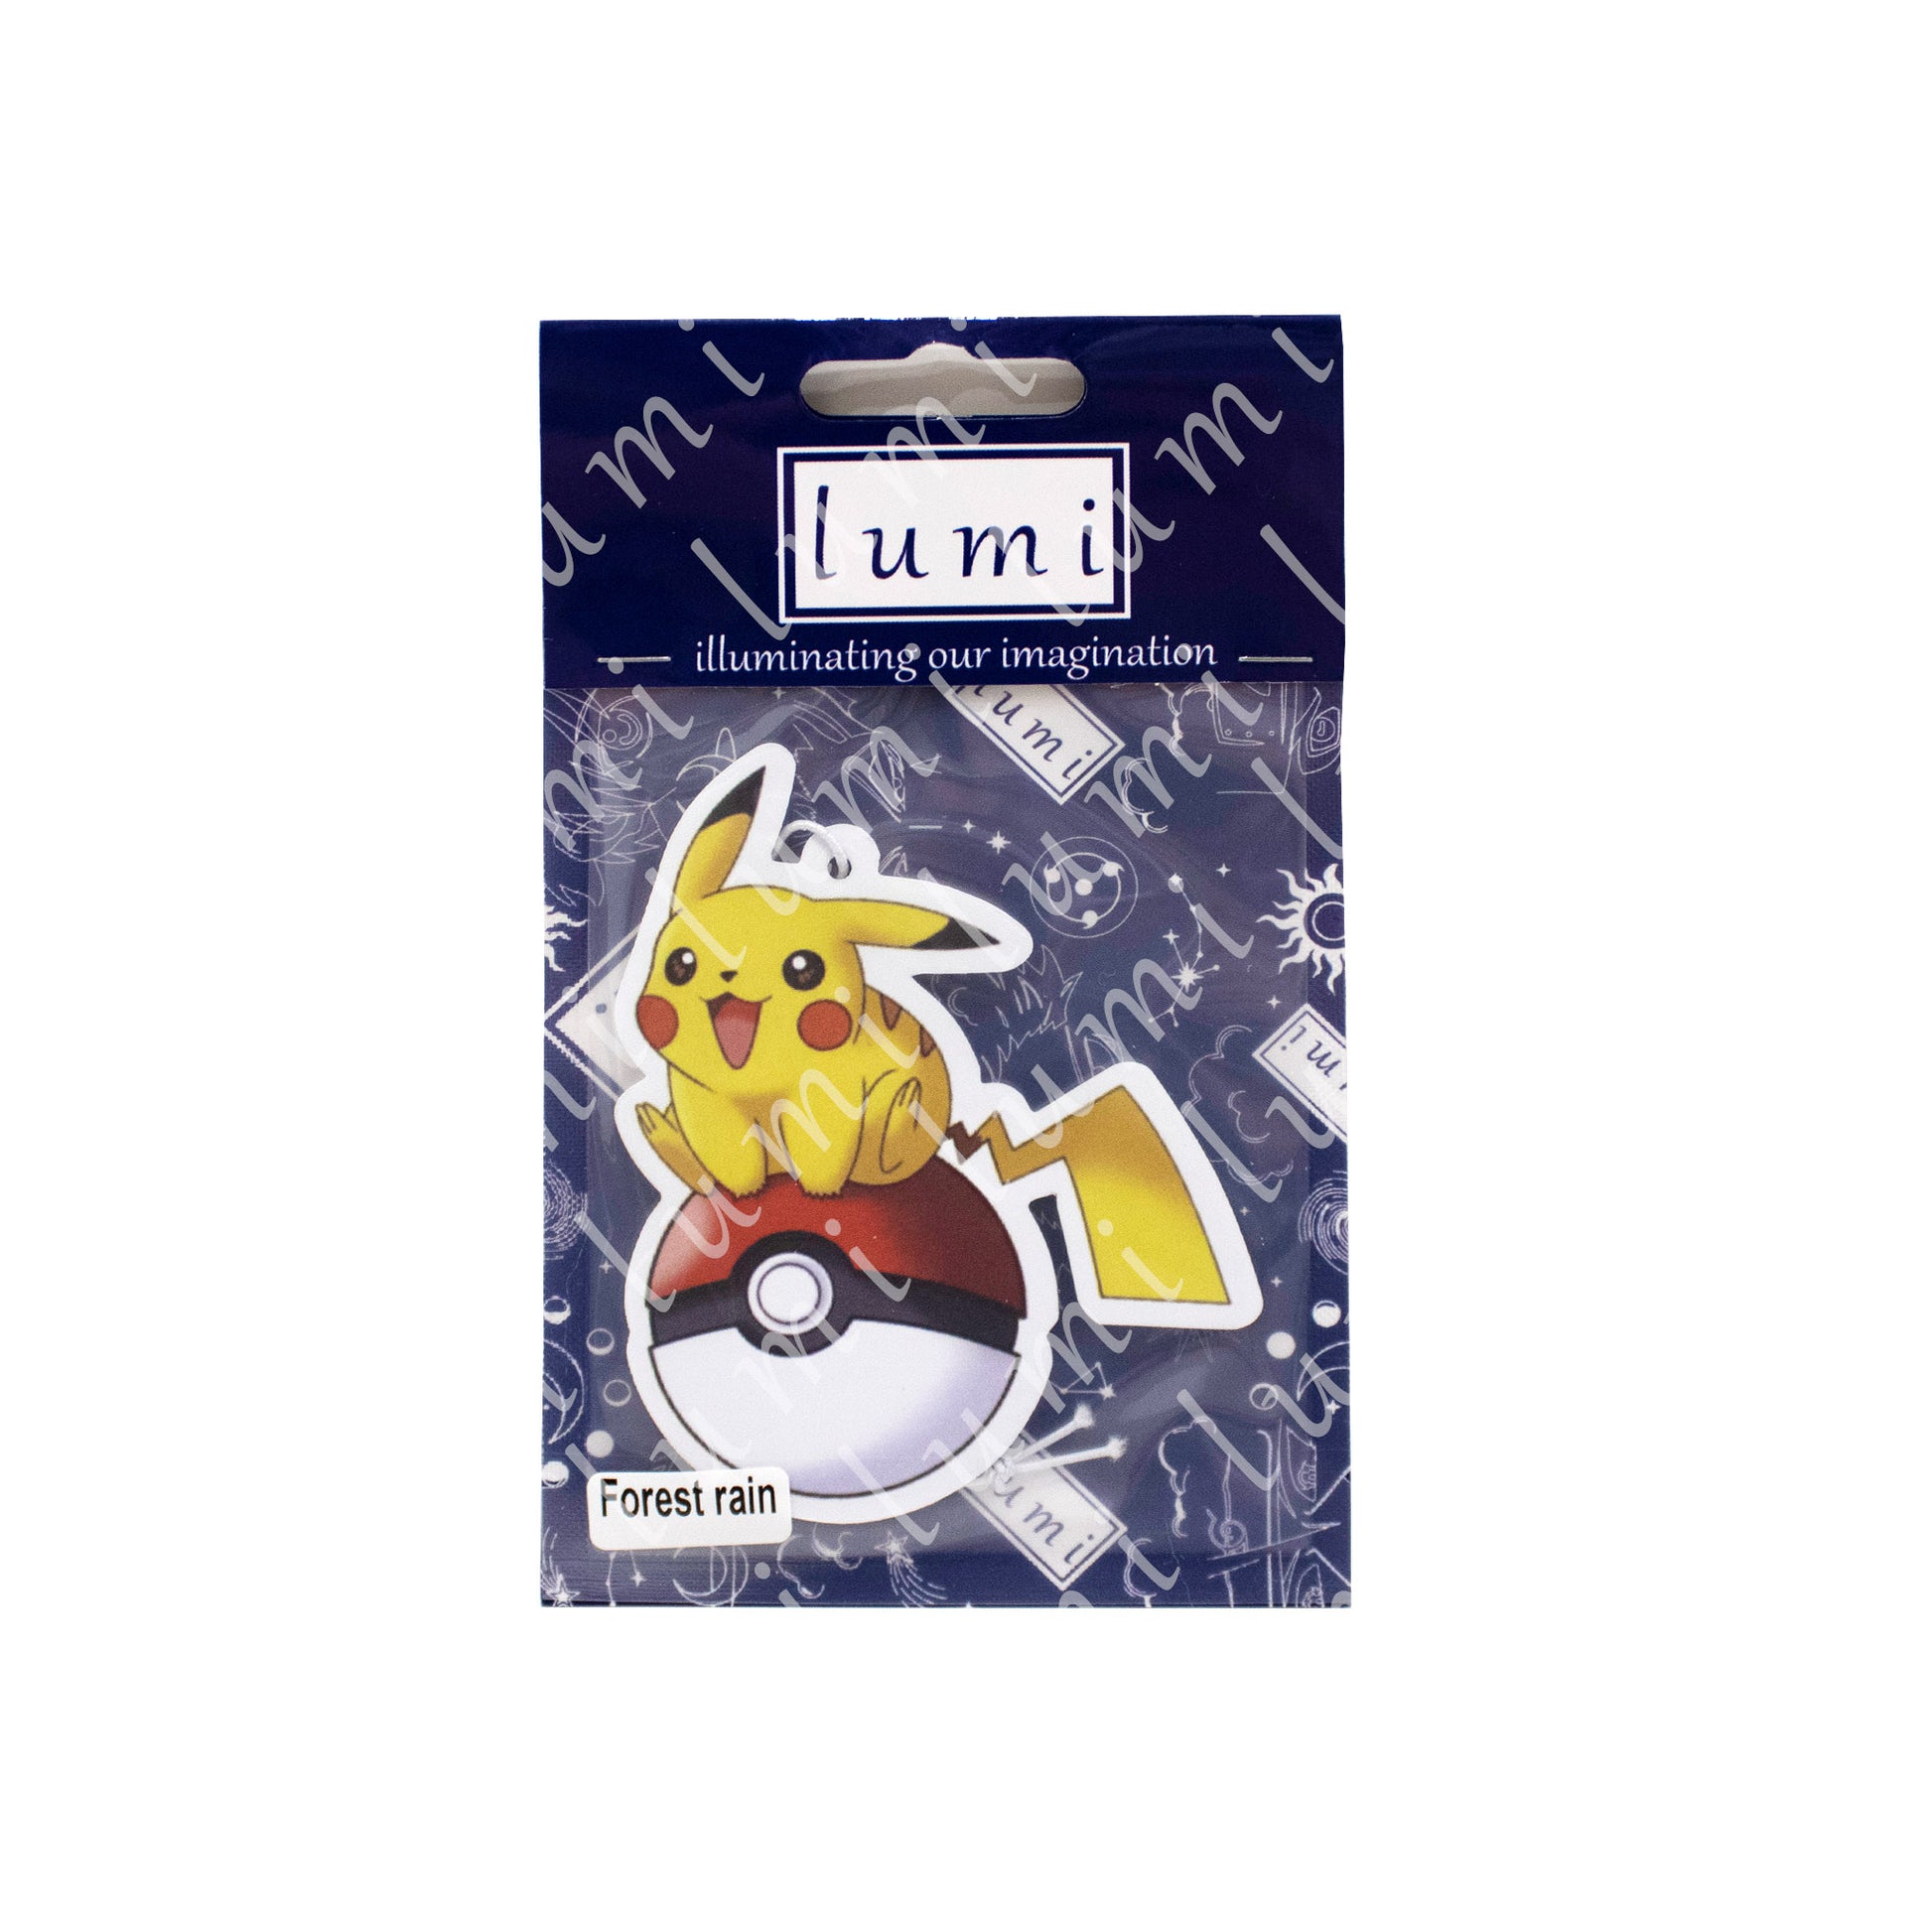 Image of a Pikachu air freshener with a pokeball design, suitable for use in a car or other small spaces. The air freshener features a cute and colorful Pikachu on a pokeball, surrounded by fresh-scented aroma.